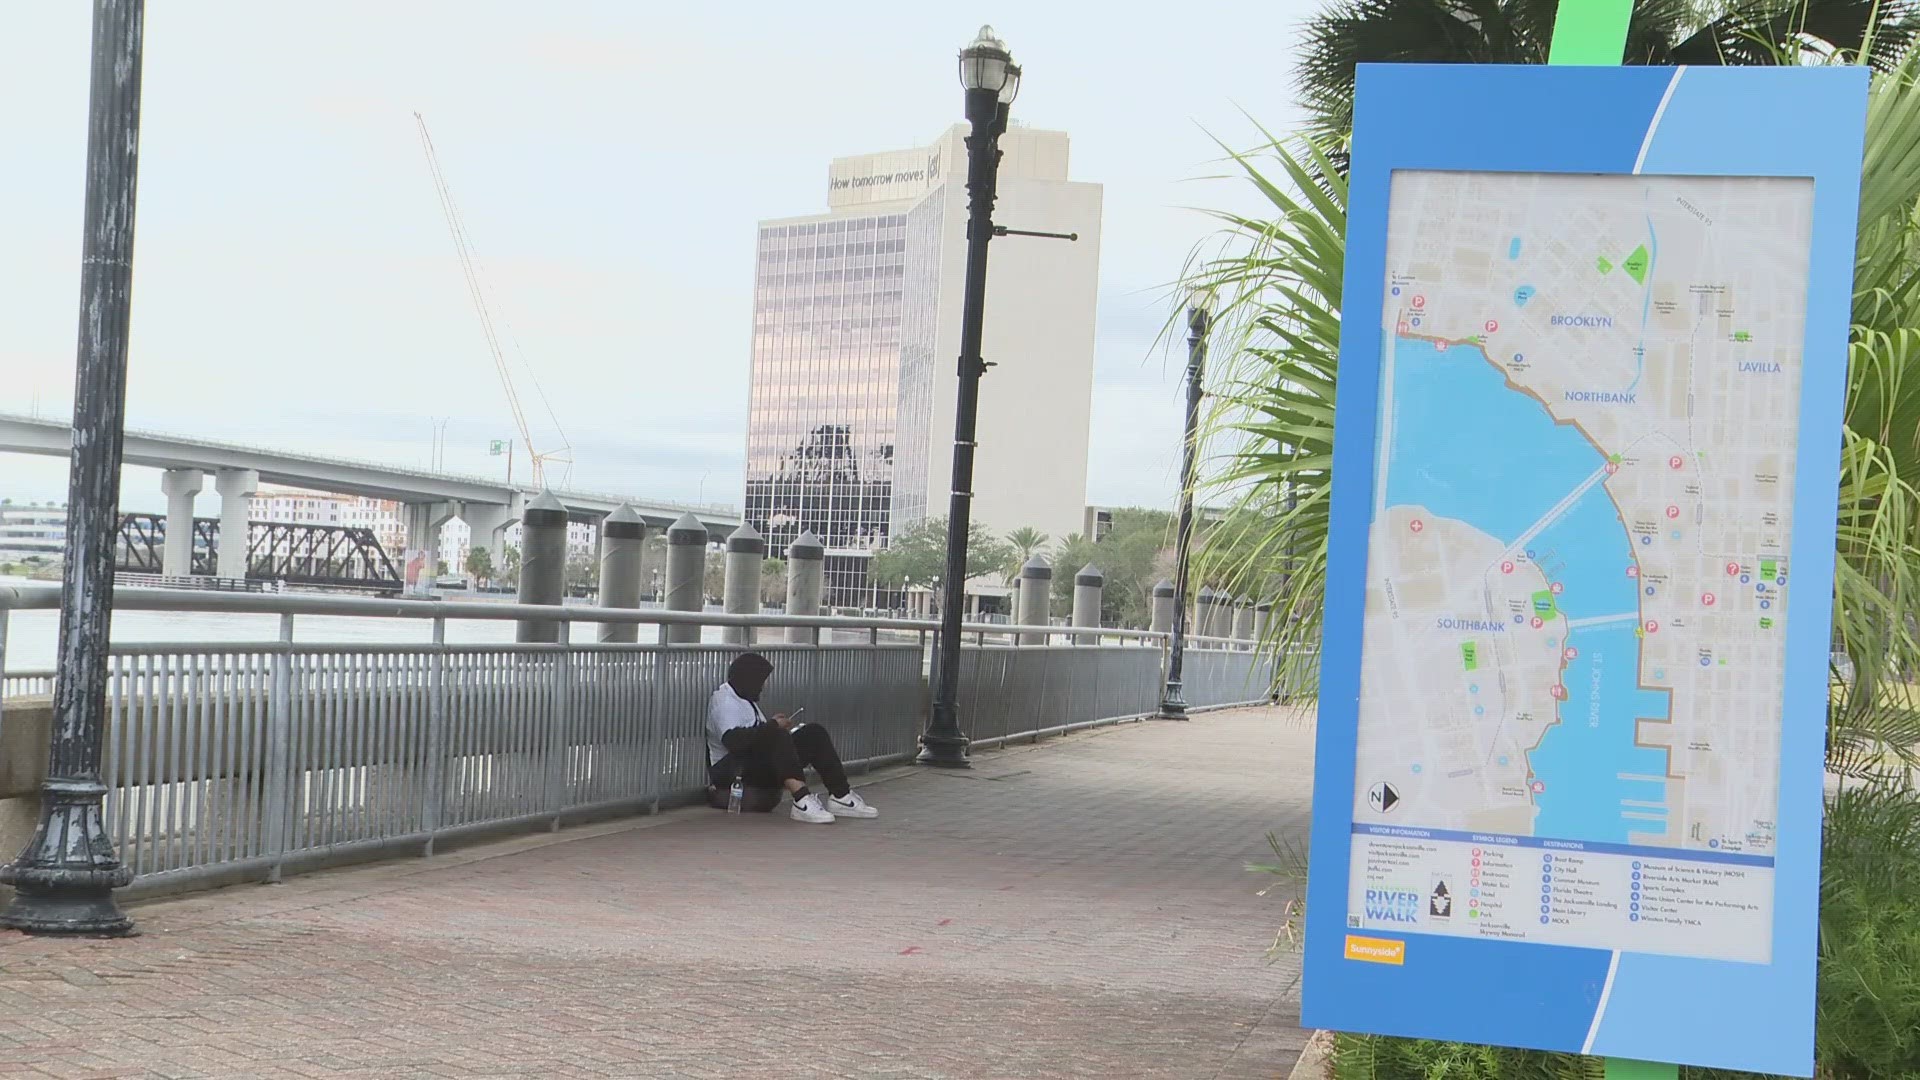 A city committee is currently in the process of reviewing the proposed bill that would allow alcohol consumption along the Riverwalk in Jacksonville.